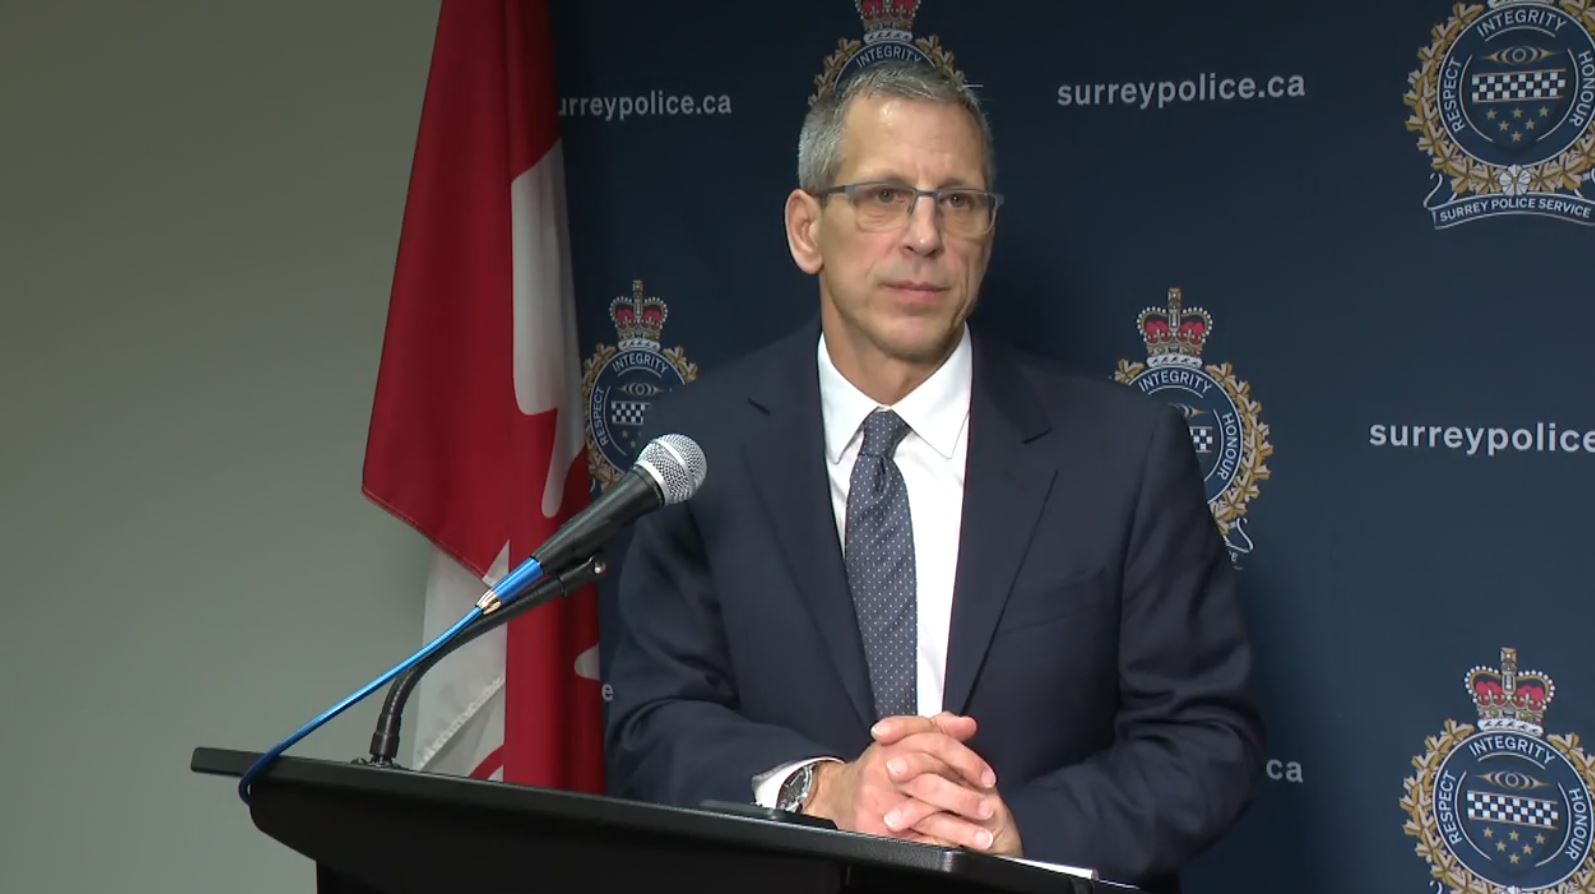 SPS officers could make up over half of Surrey police by end of 2024: Administrator